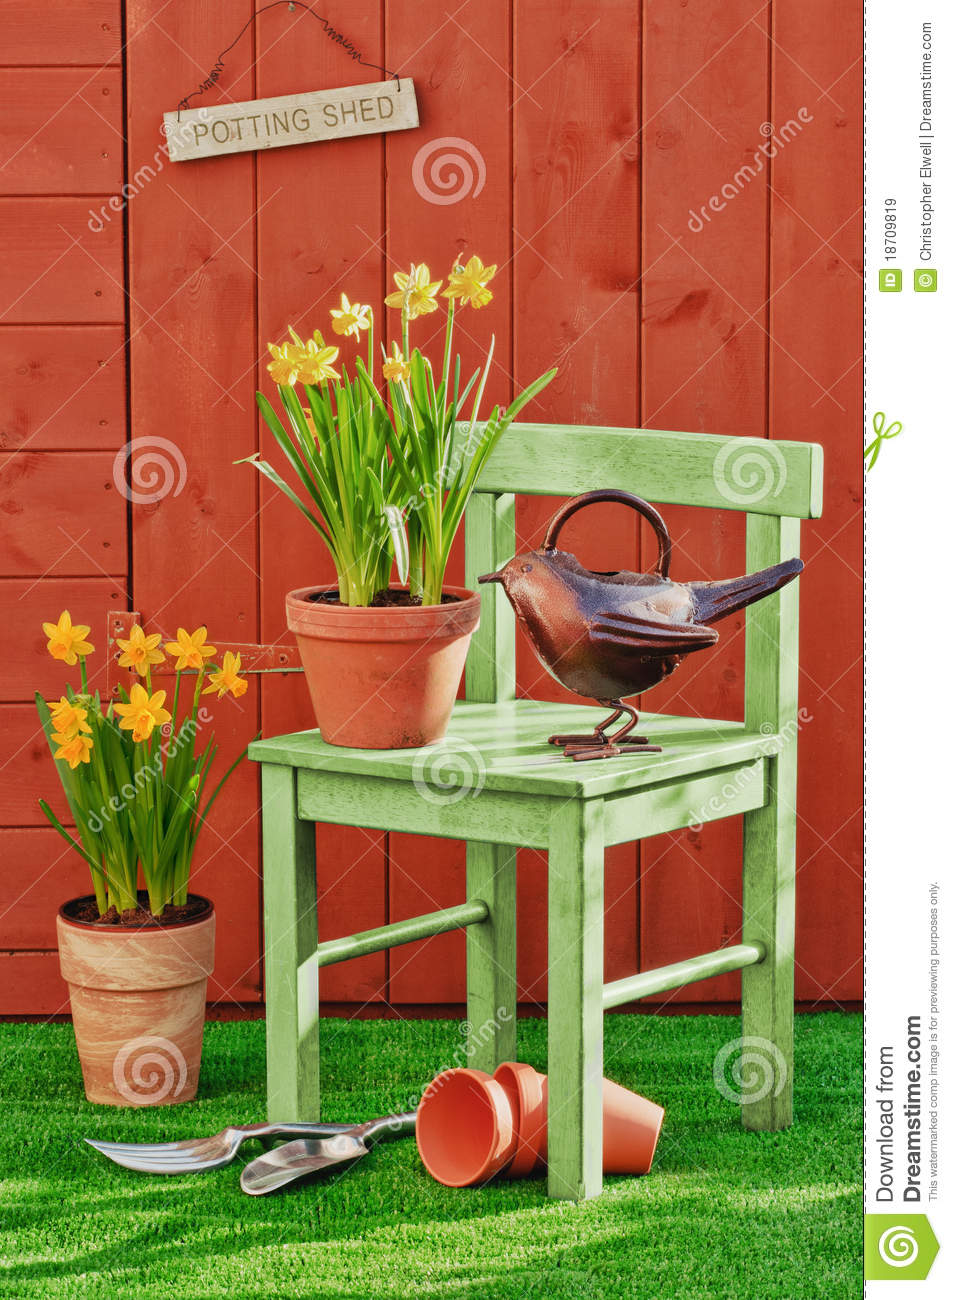 Spring Planting Royalty Free Stock Images   Image  18709819